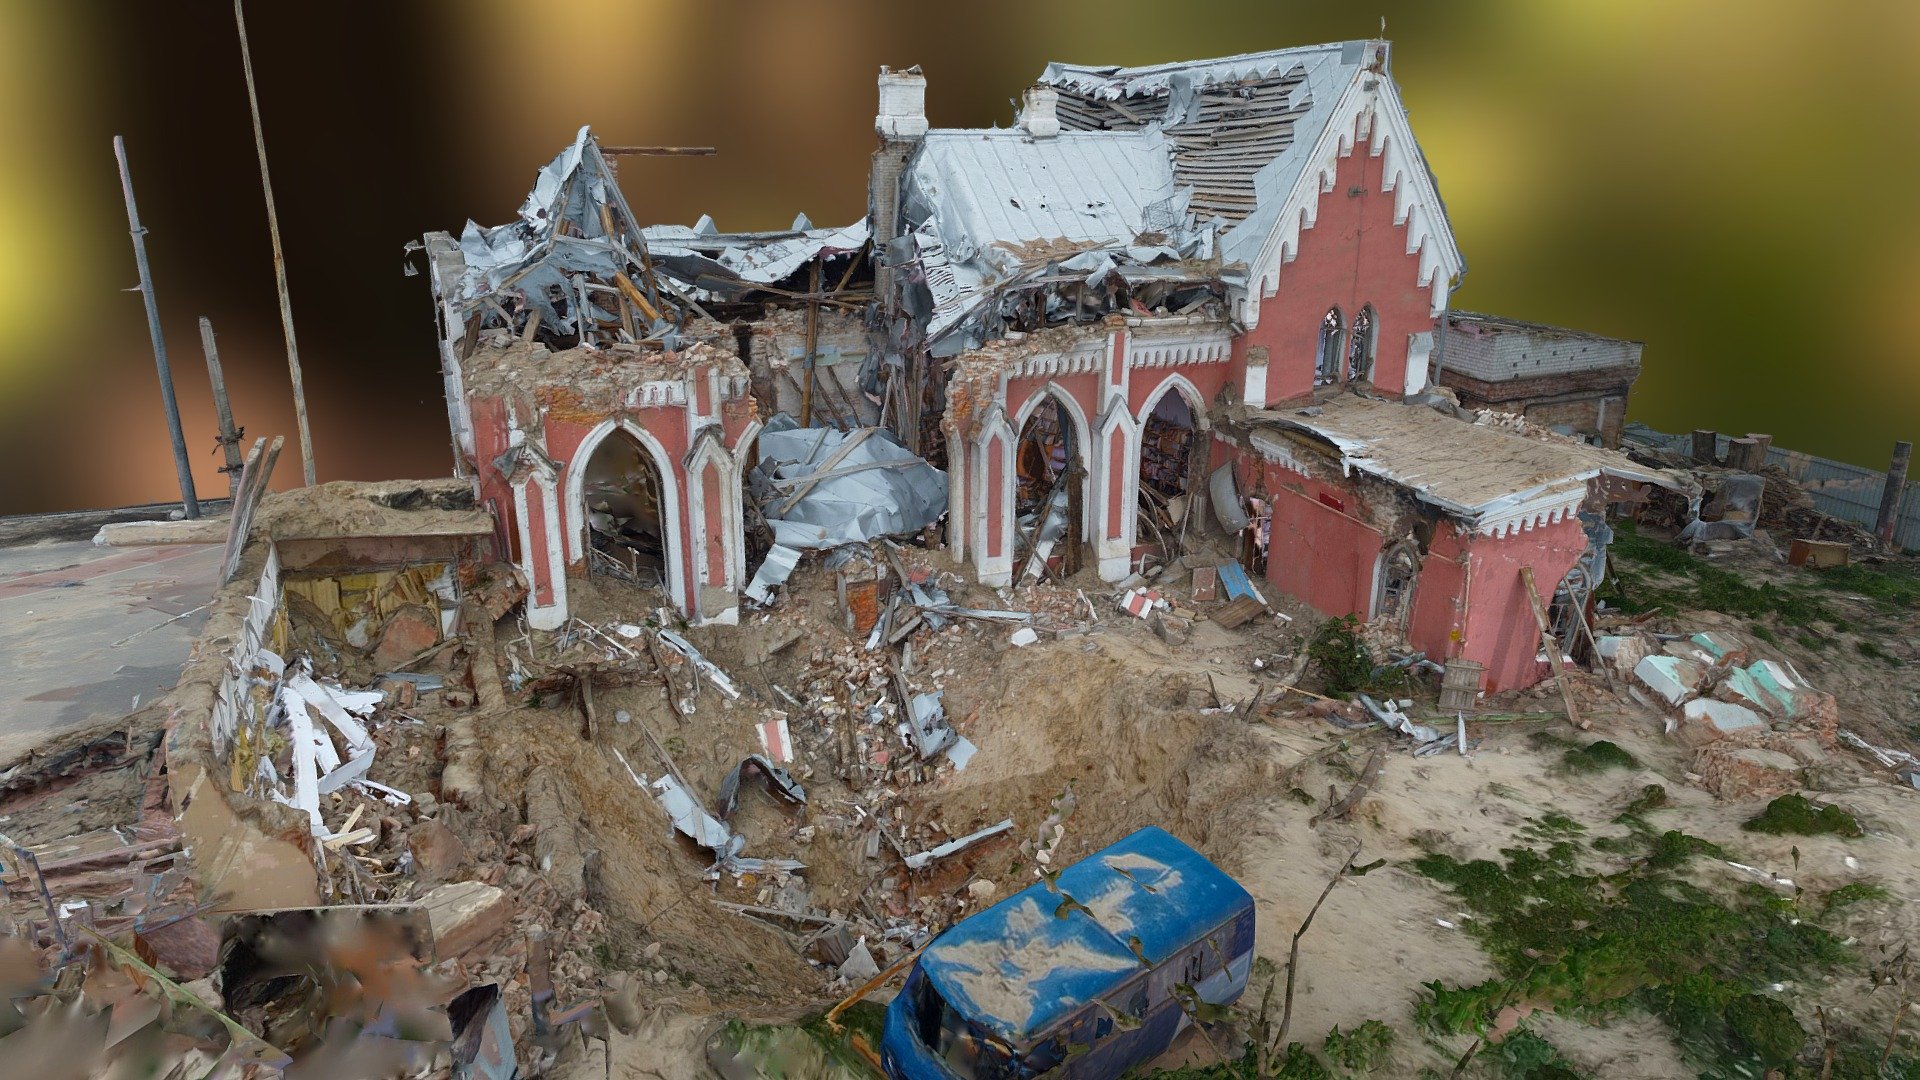 The historic museum, then a library for children was bombed on the early days of March 2022.

Part of the Heritage Emergency Response Initiative (HERI, Ukraine), the action in Ukraine is the team work of volunteers.  War damages were captured  on various sites and building of heritage importance.

Site Coordination Ihor Poshyvailo 🇺🇦
Site Drone flight Sergey Revenko 🇺🇦 @r.sergey01
Site 3D imaging laser Emmanuel Durand 🇫🇷
3D computing and texturing by Miguel Bandera  🇪🇸

3D imager BLK360 from Leica Geosystems part of Hexagon
3D computing (laser+pics) with Capturing Reality - Bombed Chernihiv historic library (Ukraine) - 3D model by Miguel Bandera (@miguelbandera) 3d model